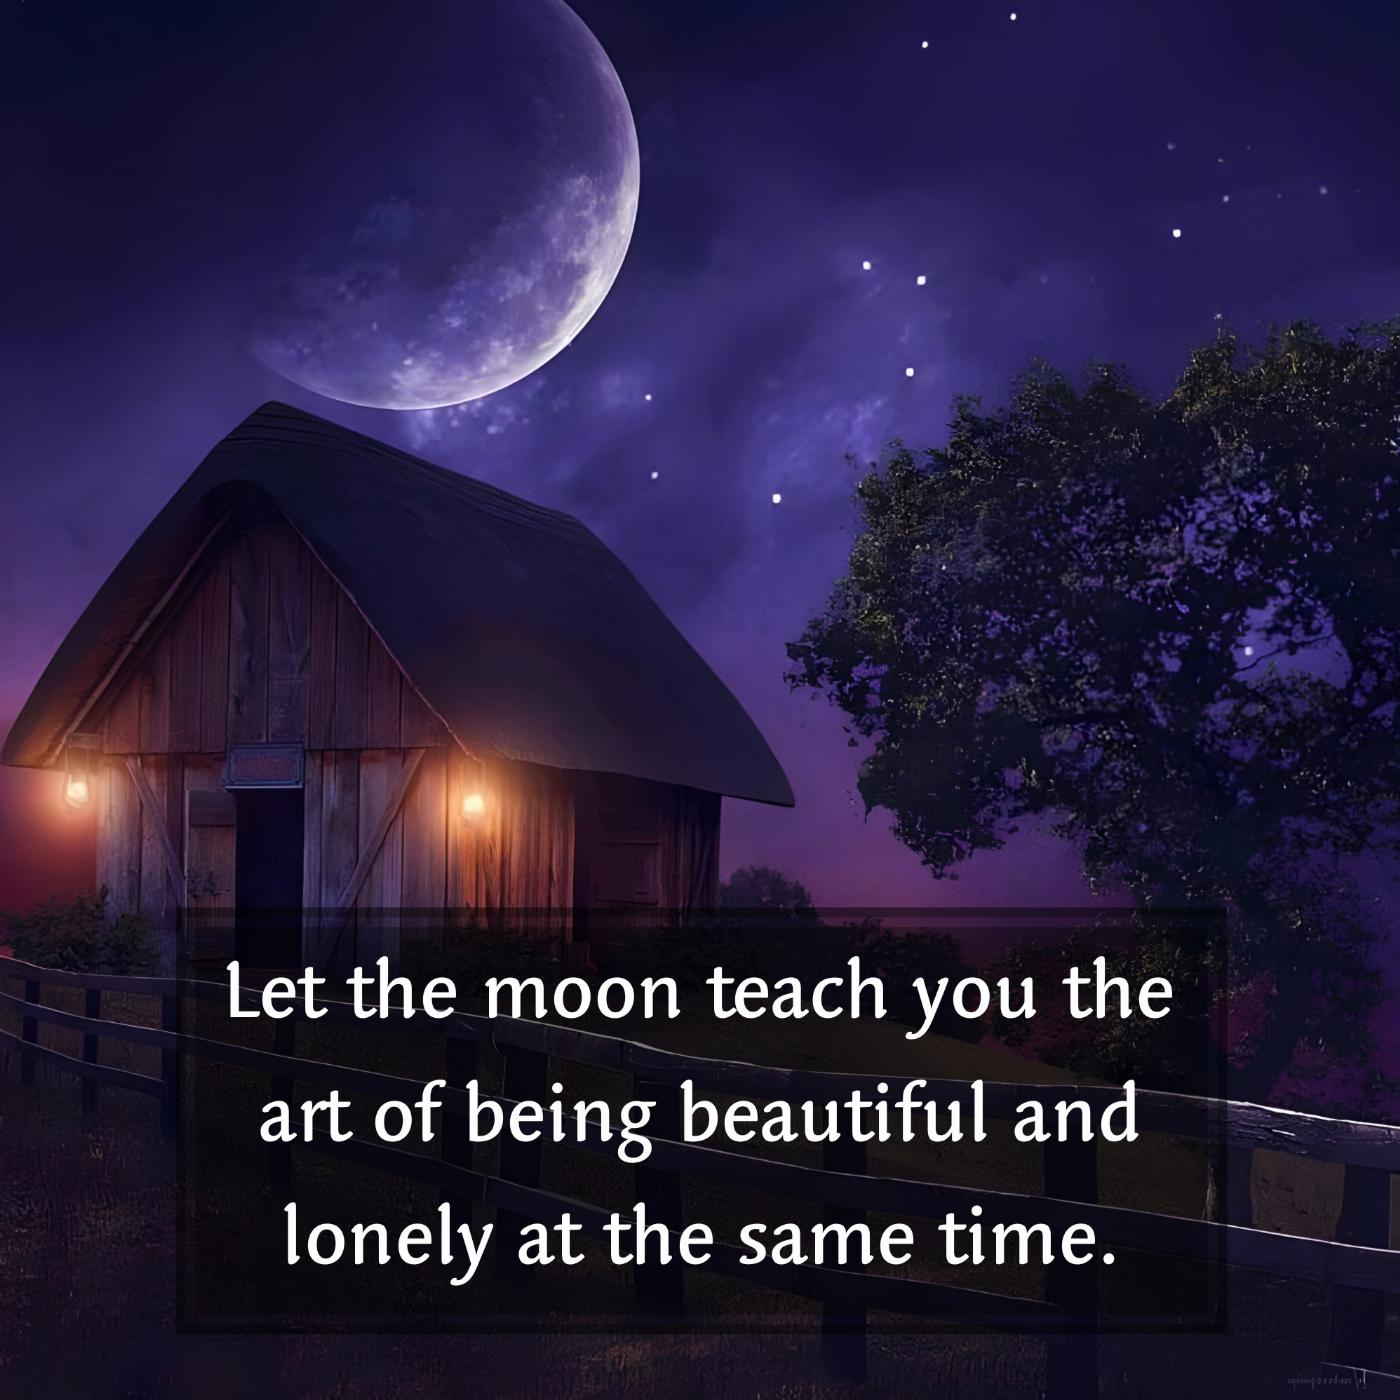 Let the moon teach you the art of being beautiful and lonely